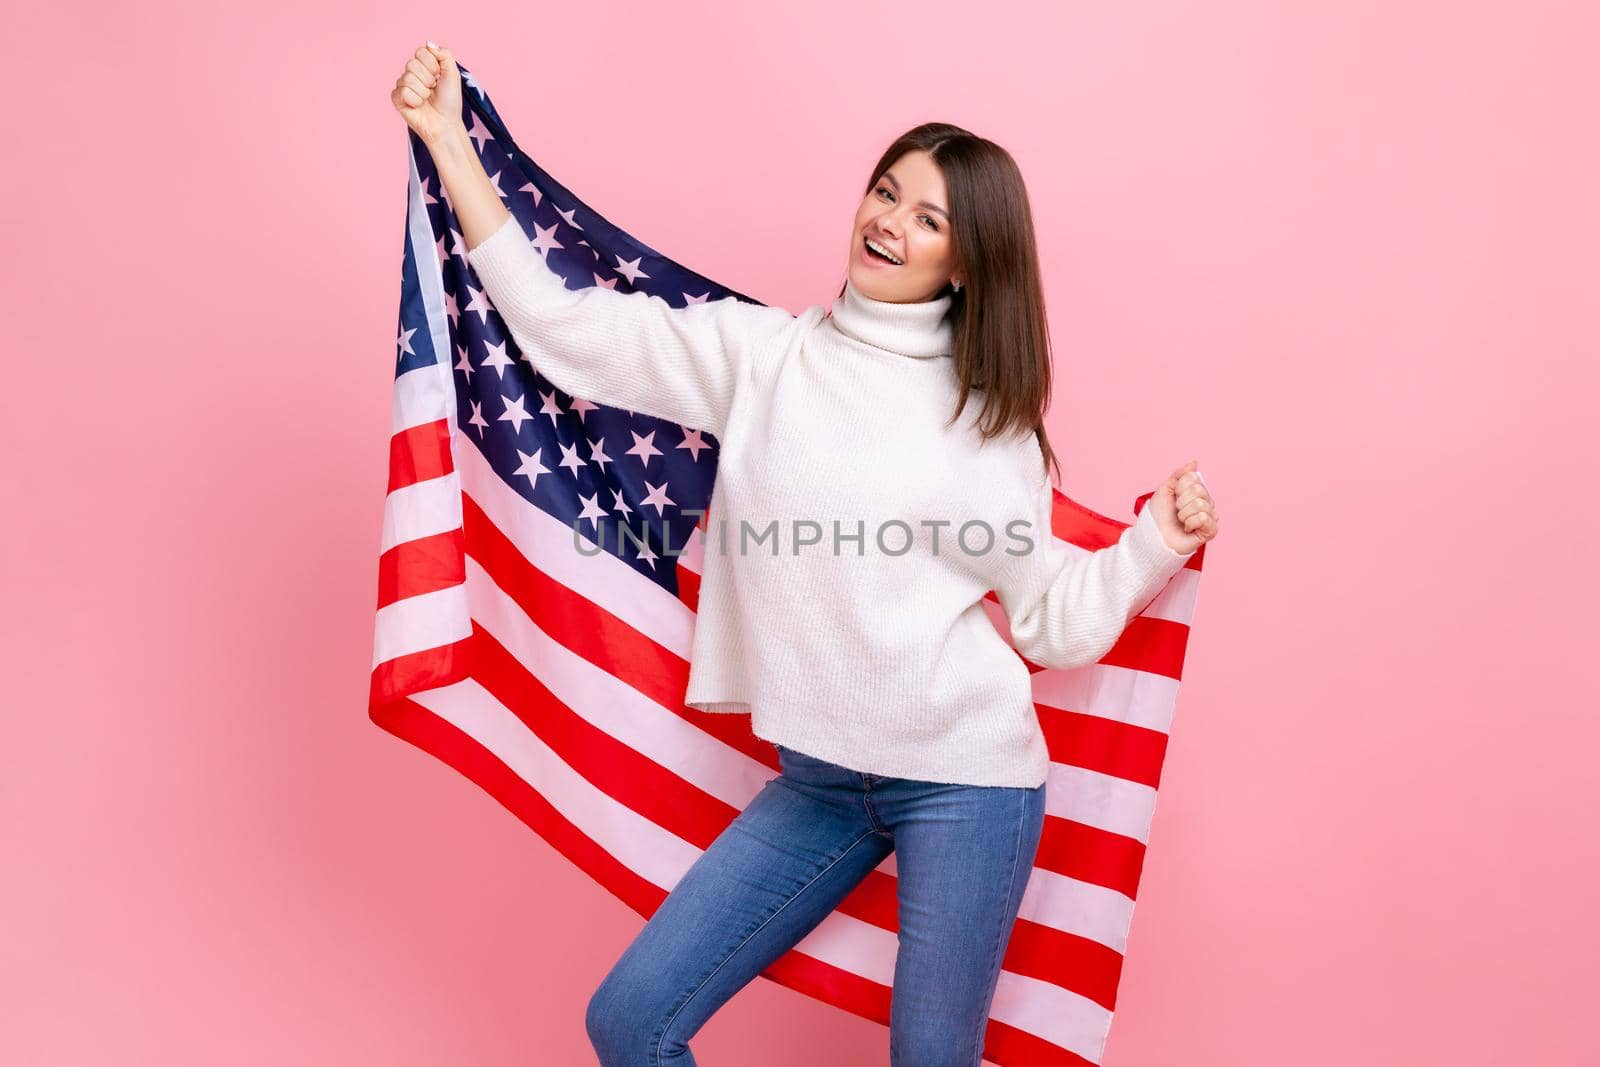 Portrait of pretty woman raised arms, holding american flag, celebrating national holiday, dancing, wearing white casual style sweater. Indoor studio shot isolated on pink background.